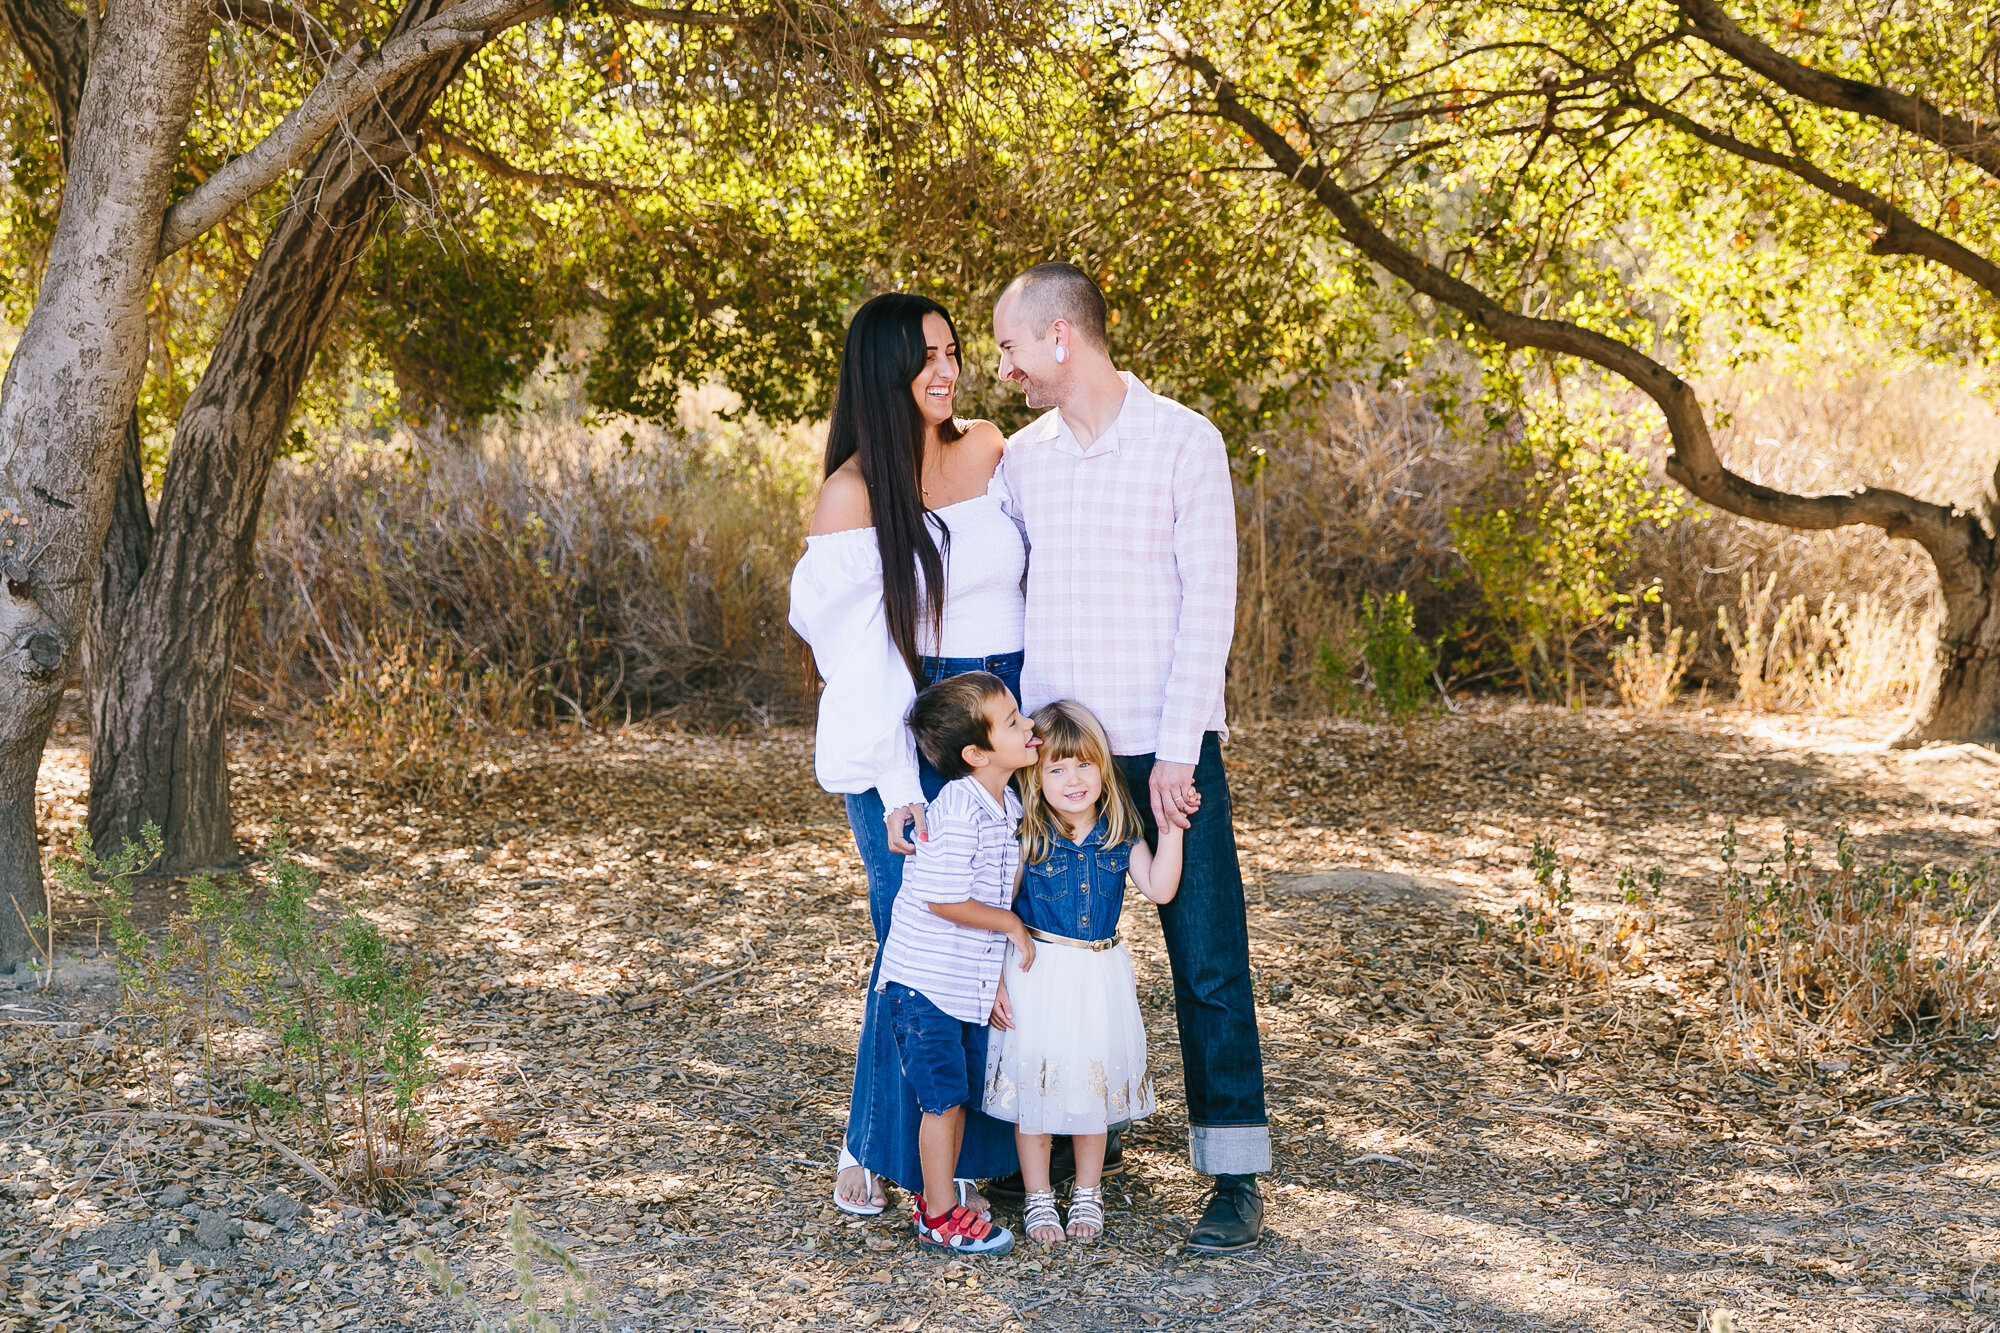 Los_Angeles_Family_Photography_Orange_County_Children_Babies_Field_Farm_Outdoors_Morning_Session_California_Girls_Boys_Kids_Photography-0396.jpg